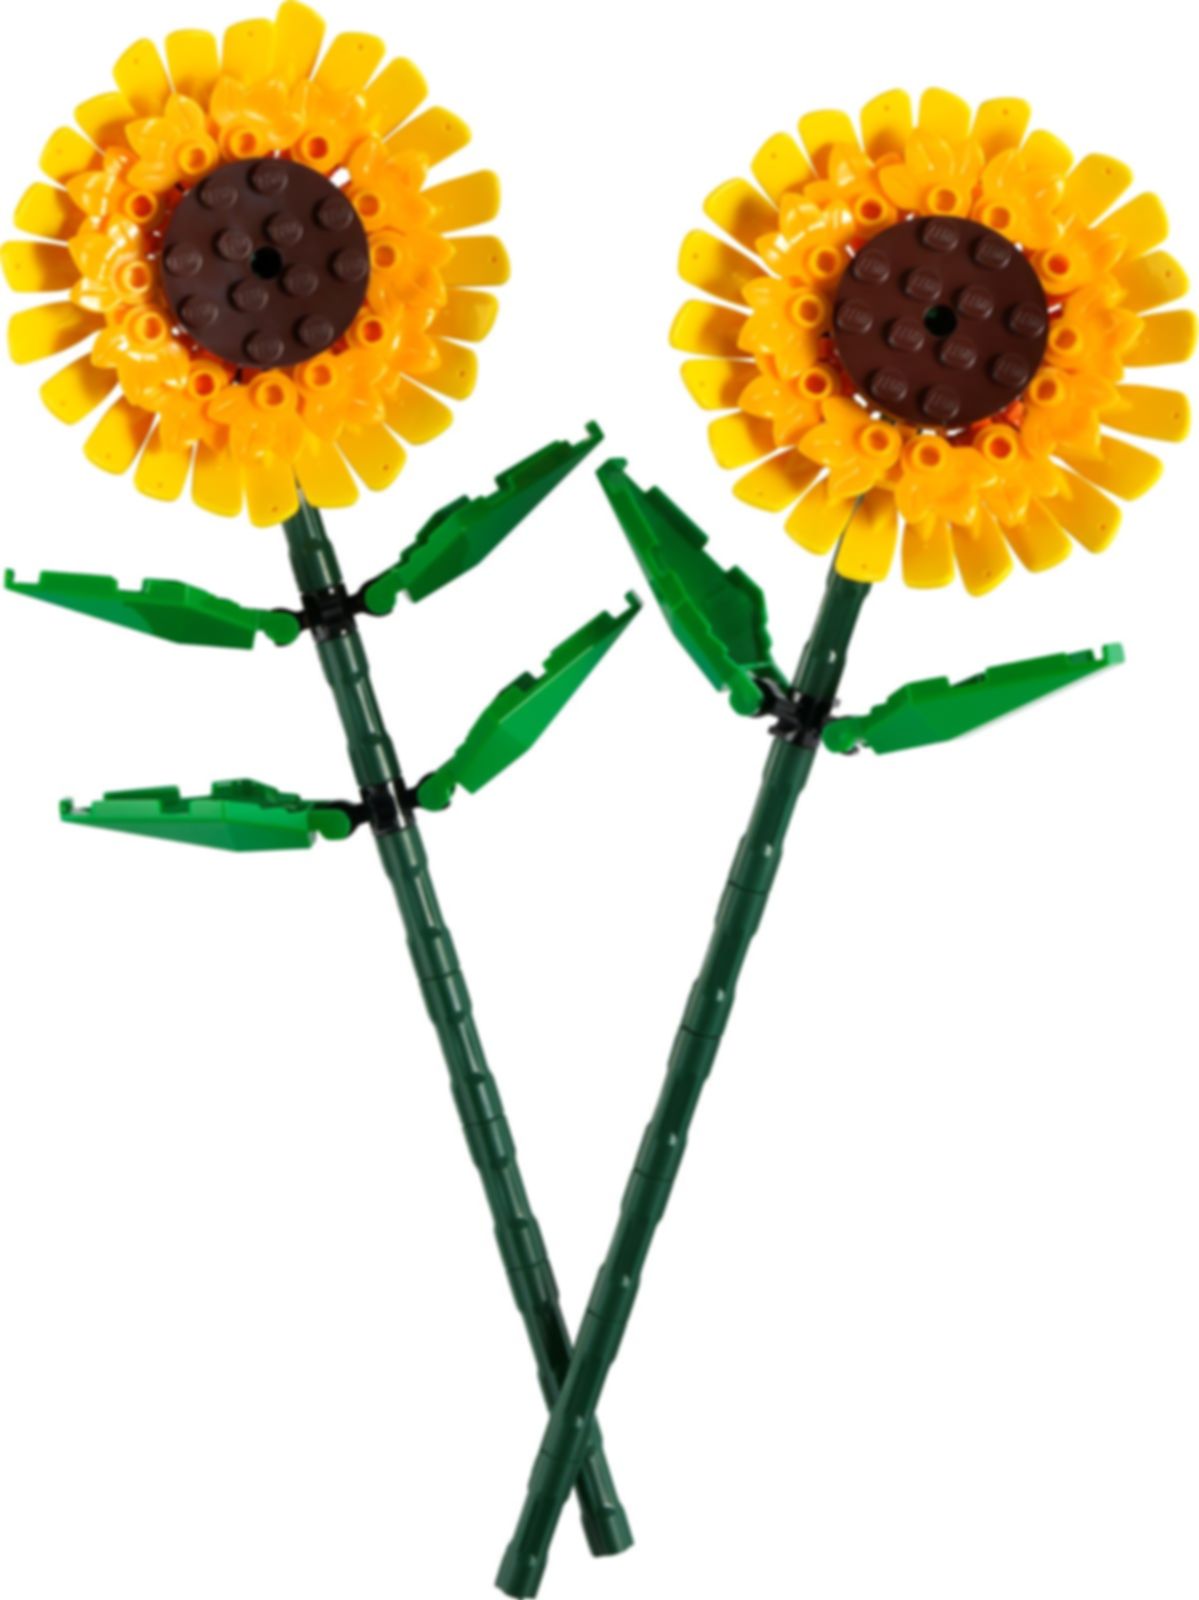 Sunflowers components